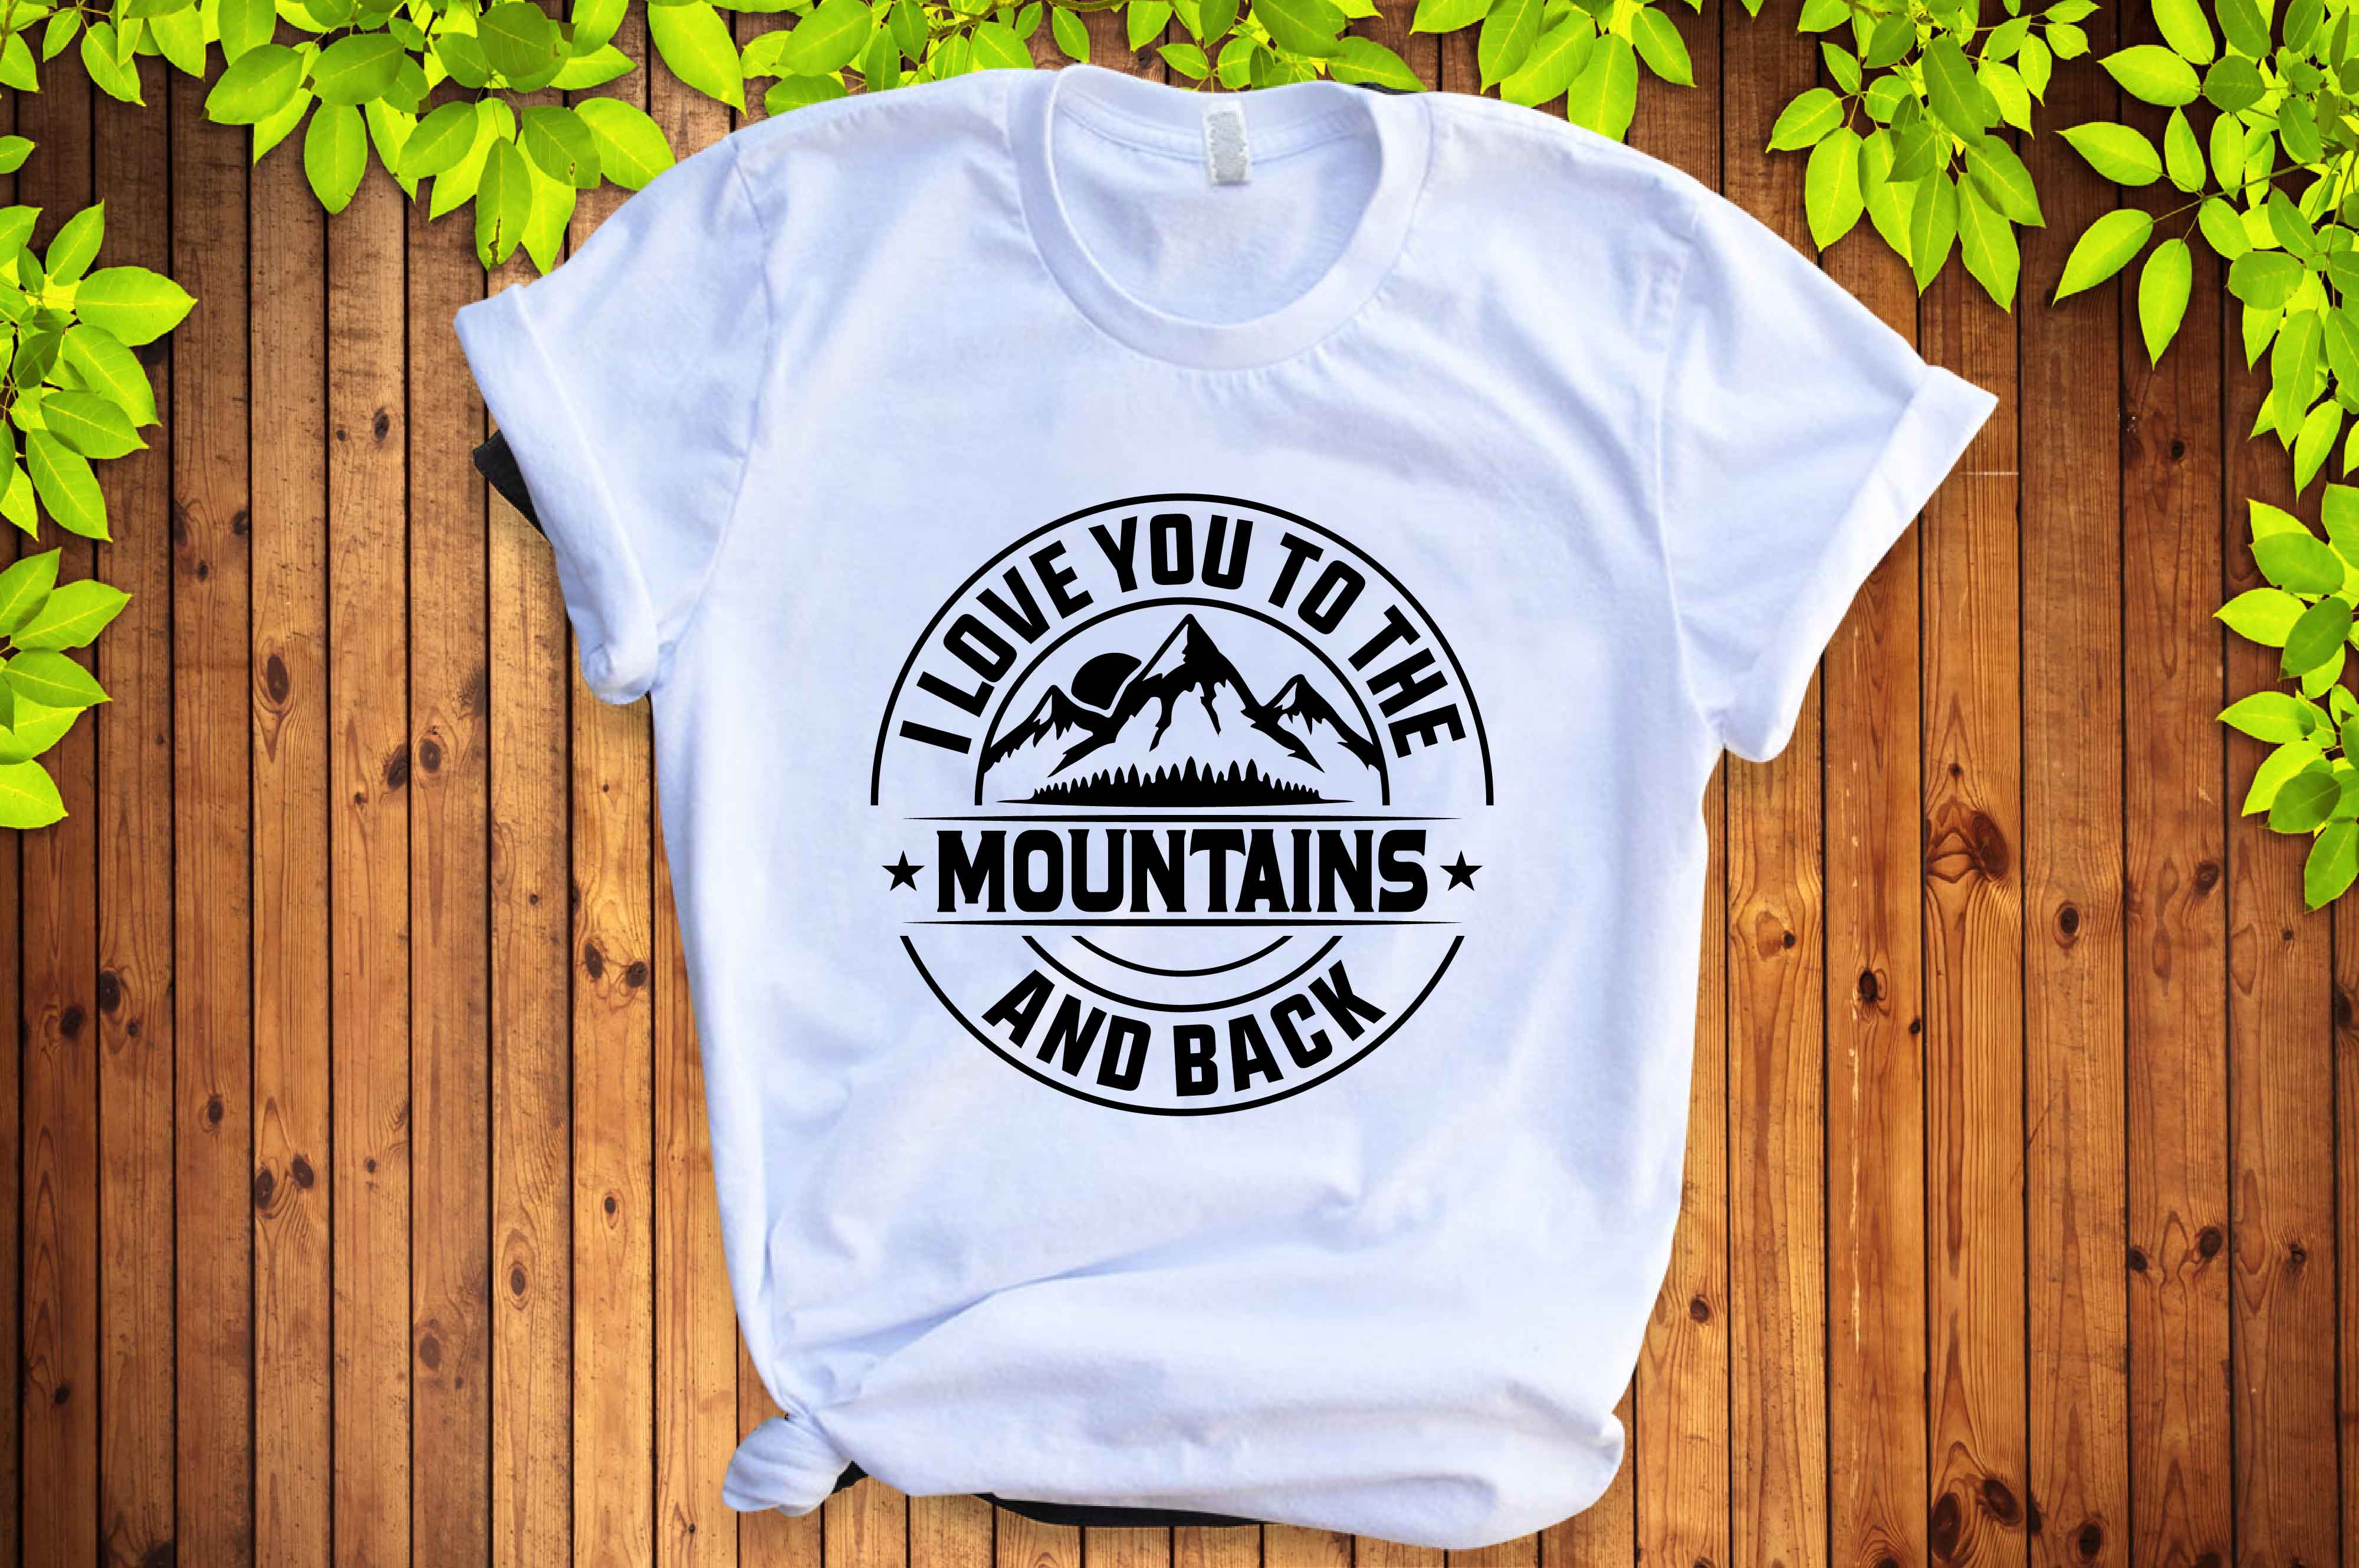 White t - shirt that says live you to the mountains and back.